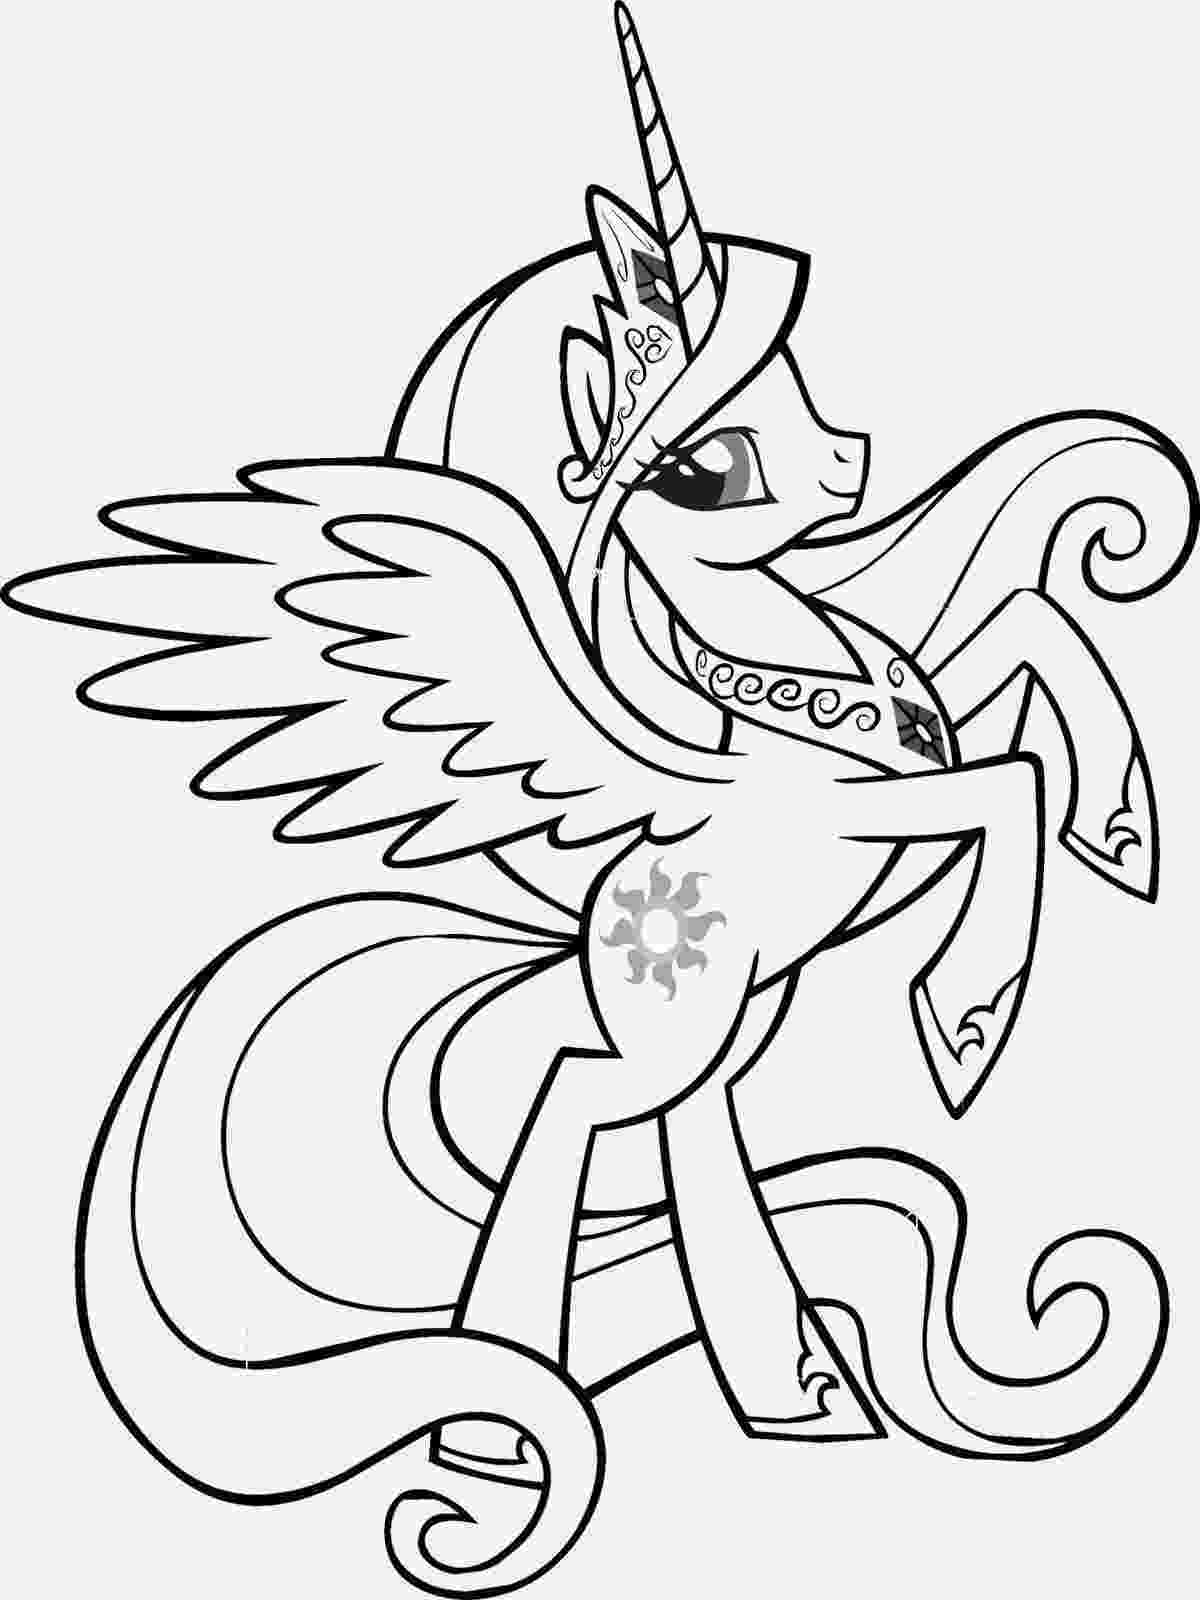 unicorn coloring pictures unicorn coloring pages to download and print for free coloring pictures unicorn 